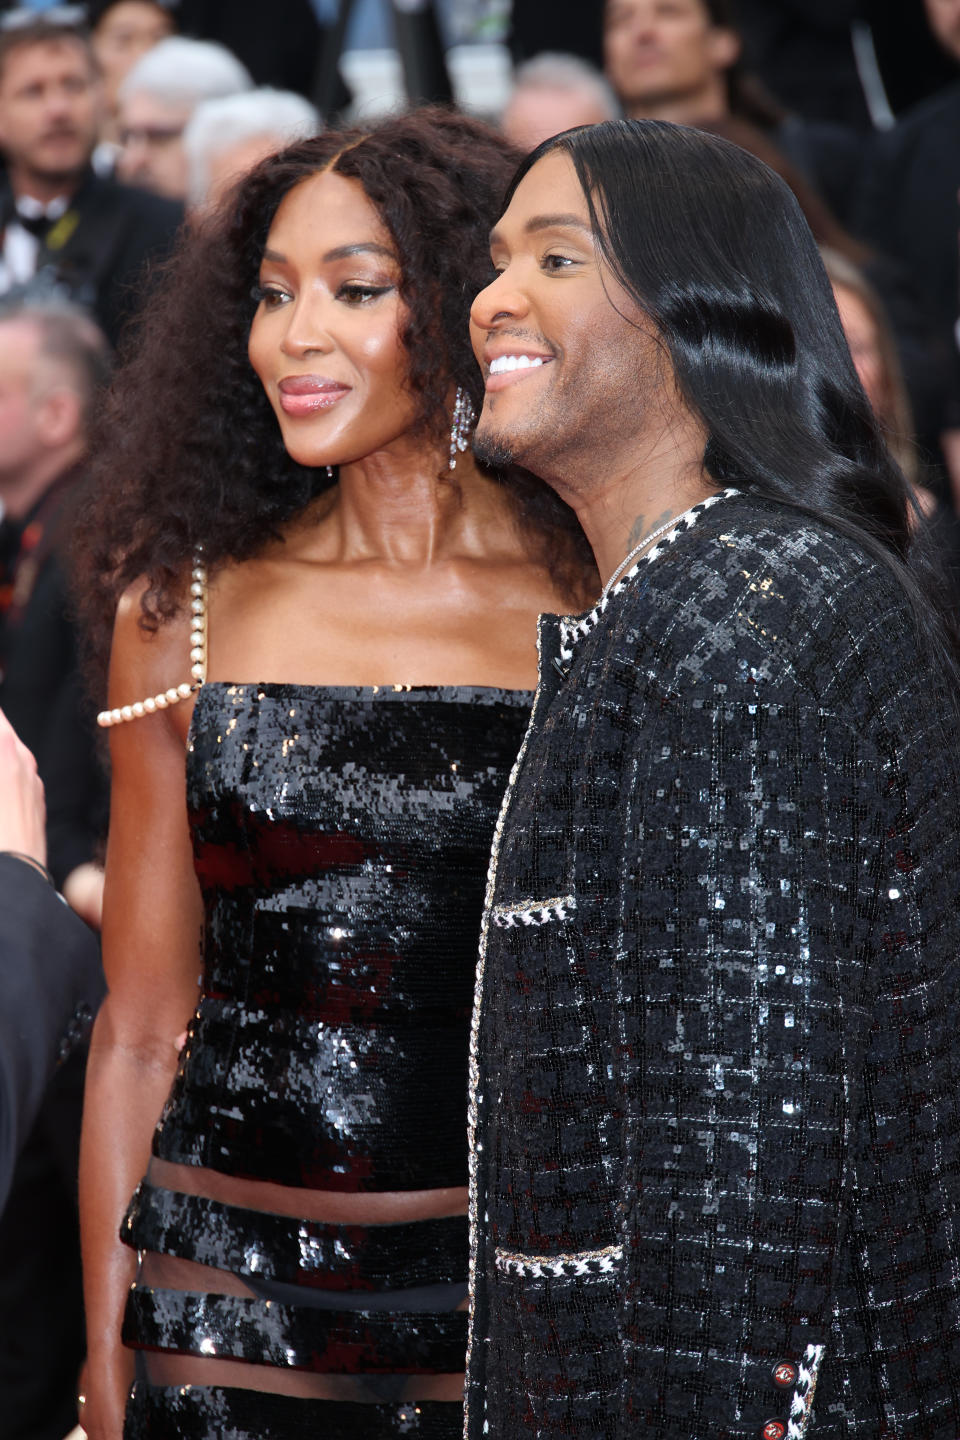 Naomi Campbell and Law Roach on the Cannes red carpet wearing Chanel